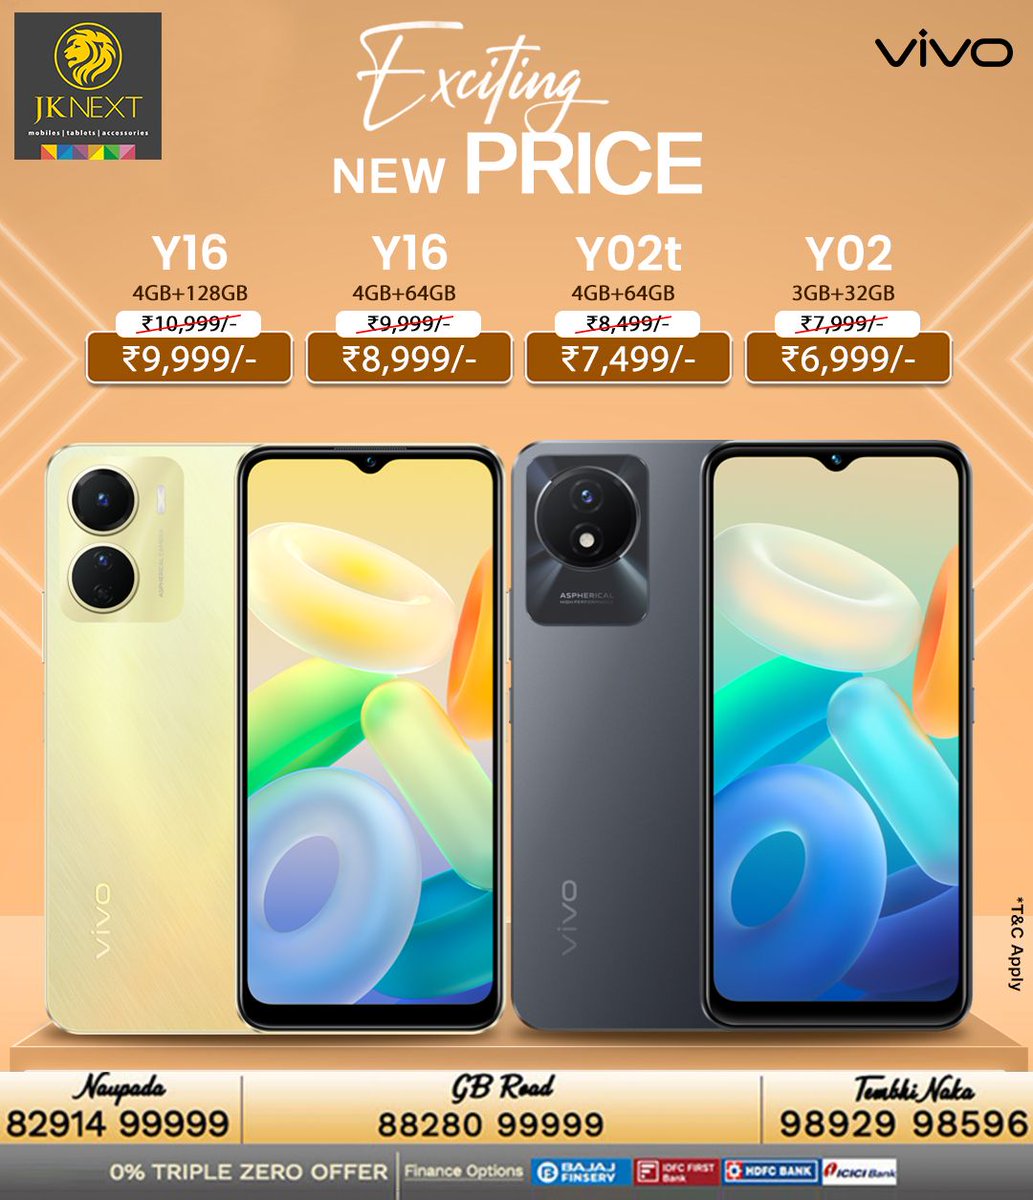 Treat yourself to the best of Vivo's Y-series - they will make your life easier and more enjoyable. Get yours today! Call 88280 99999 to know more. #Mobiles #Smartphones #BestDeals #Thane #HiranandaniEstate #Naupada #TembhiNaka #Vivo